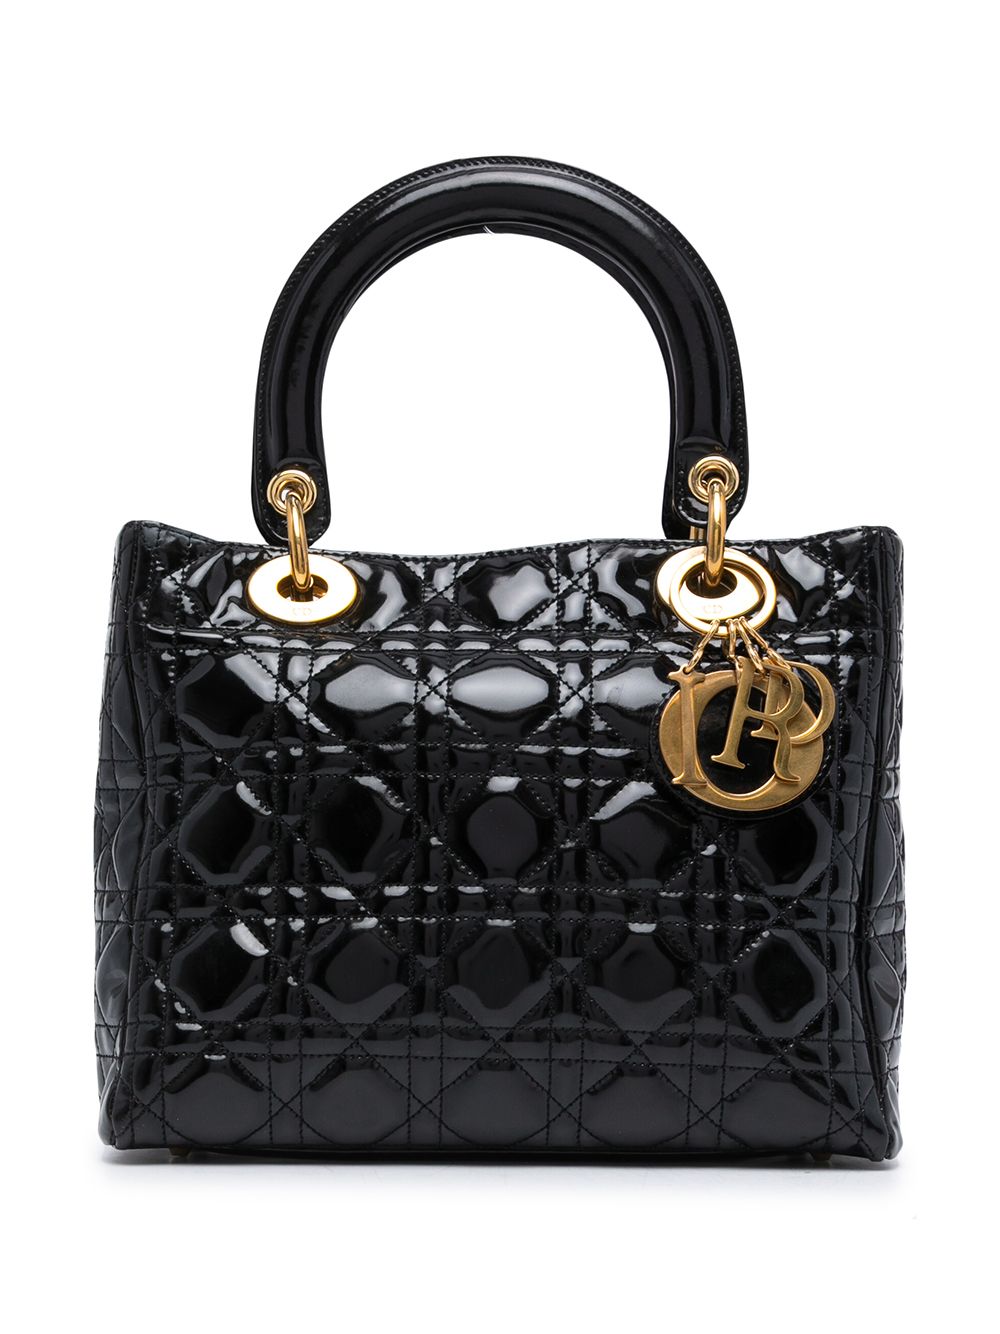 Image 1 of Christian Dior pre-owned mini Cannage Lady Dior bag